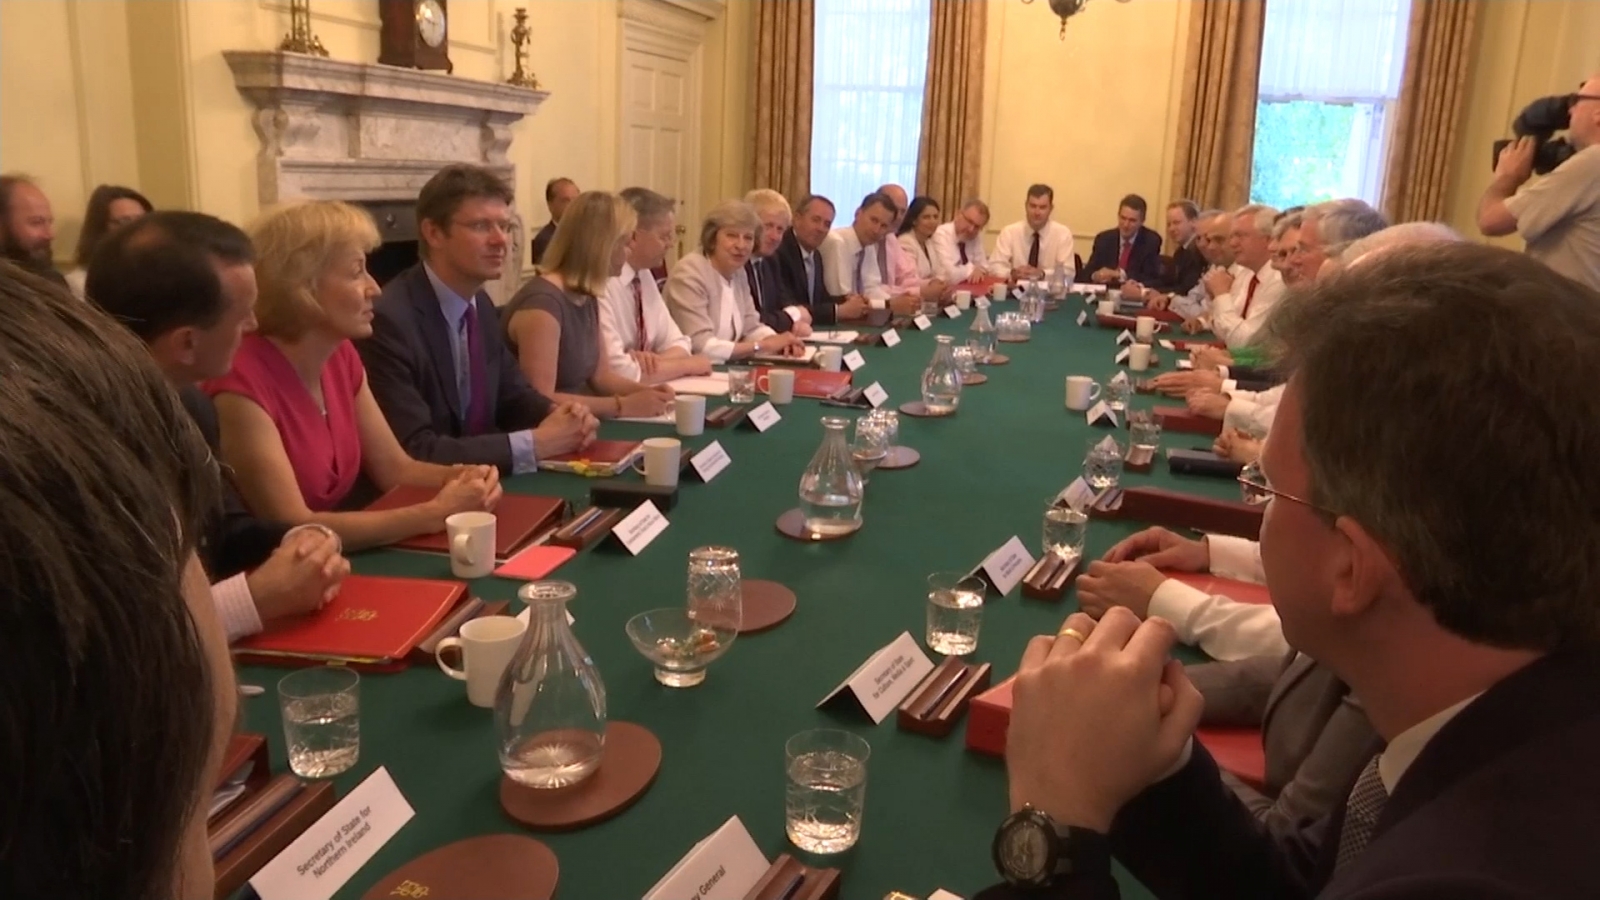 Watch What Happened When New Tory Pm Theresa May Chaired Her First Cabinet Meeting 